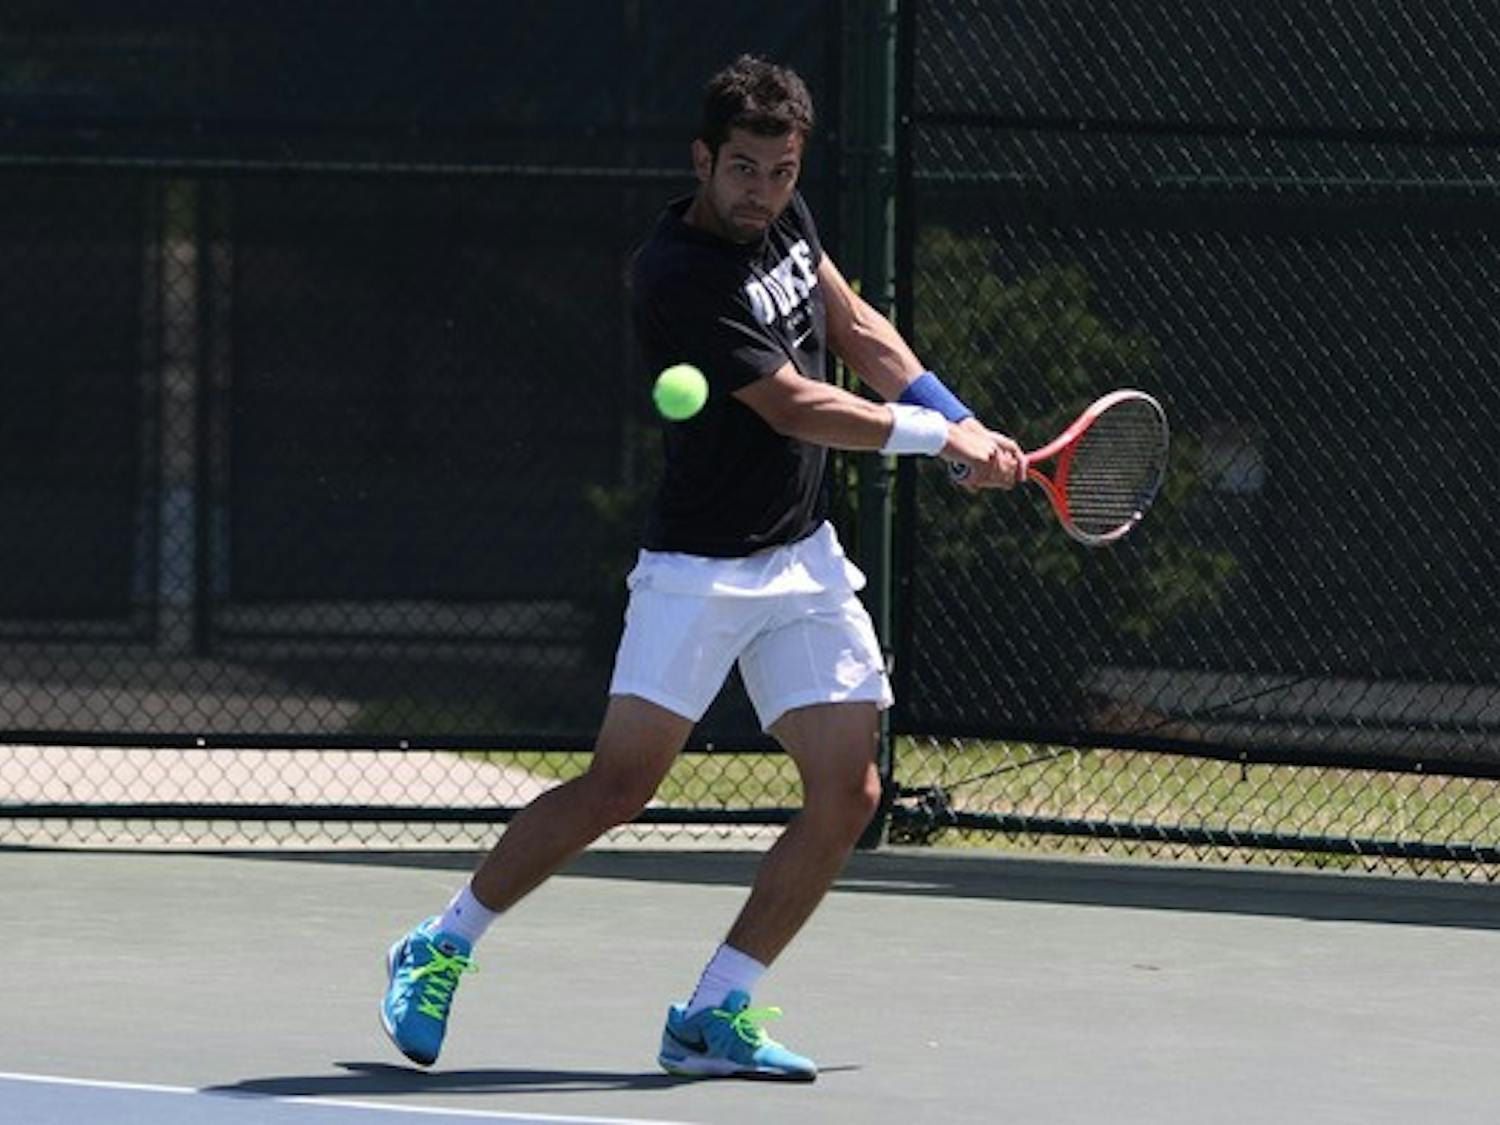 Bruno Semenzato found his footing in the second set of his singles match, but it was not enough to mount a comeback against the defending national champion Trojans.